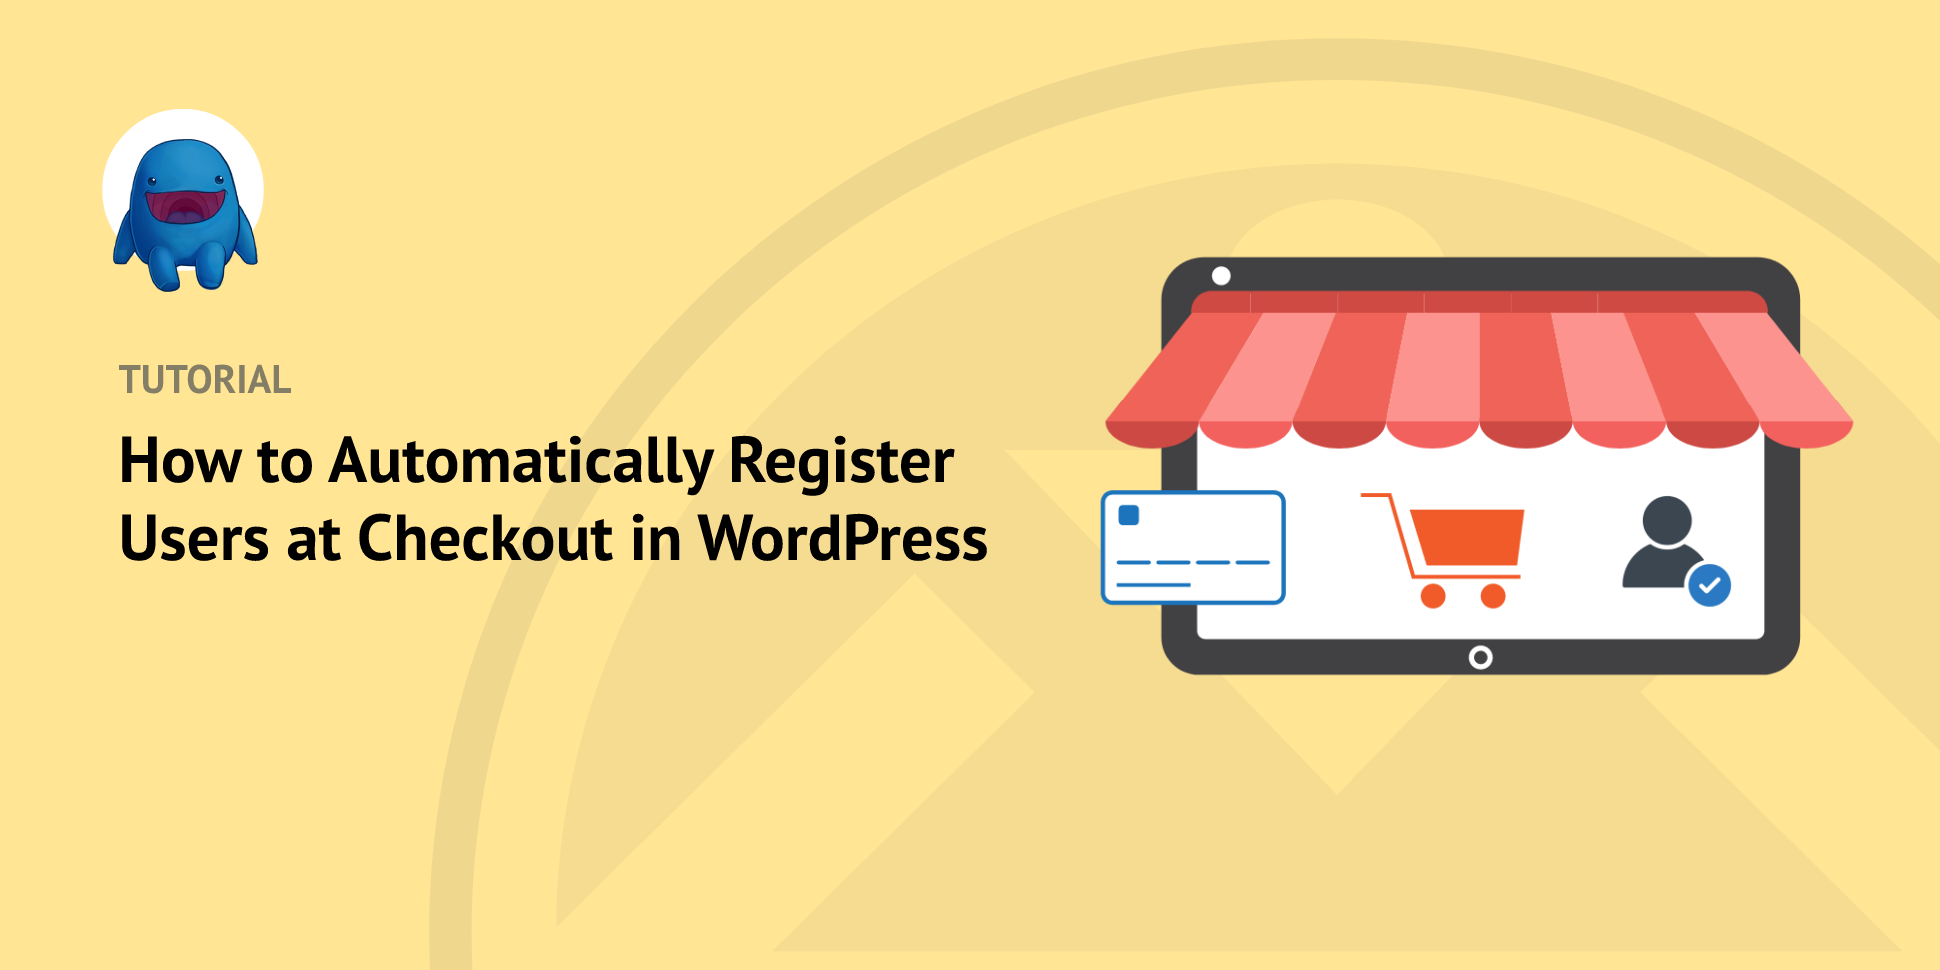 How to Automatically Register Users at Checkout in WordPress